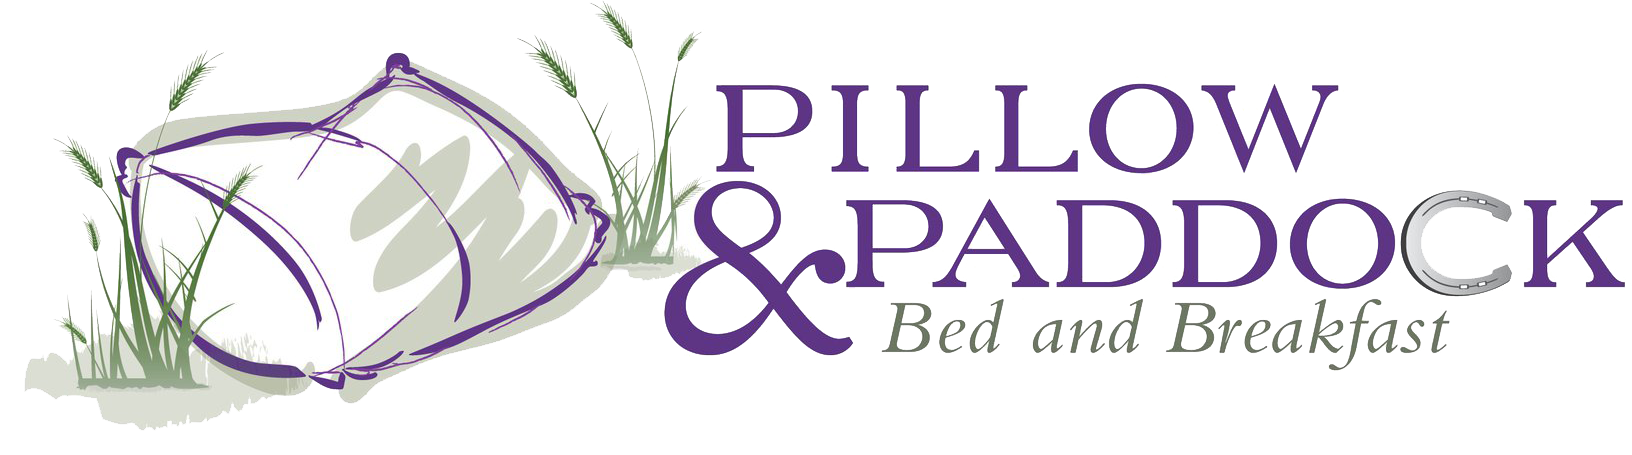 pillow and paddock bed and breakfast logo